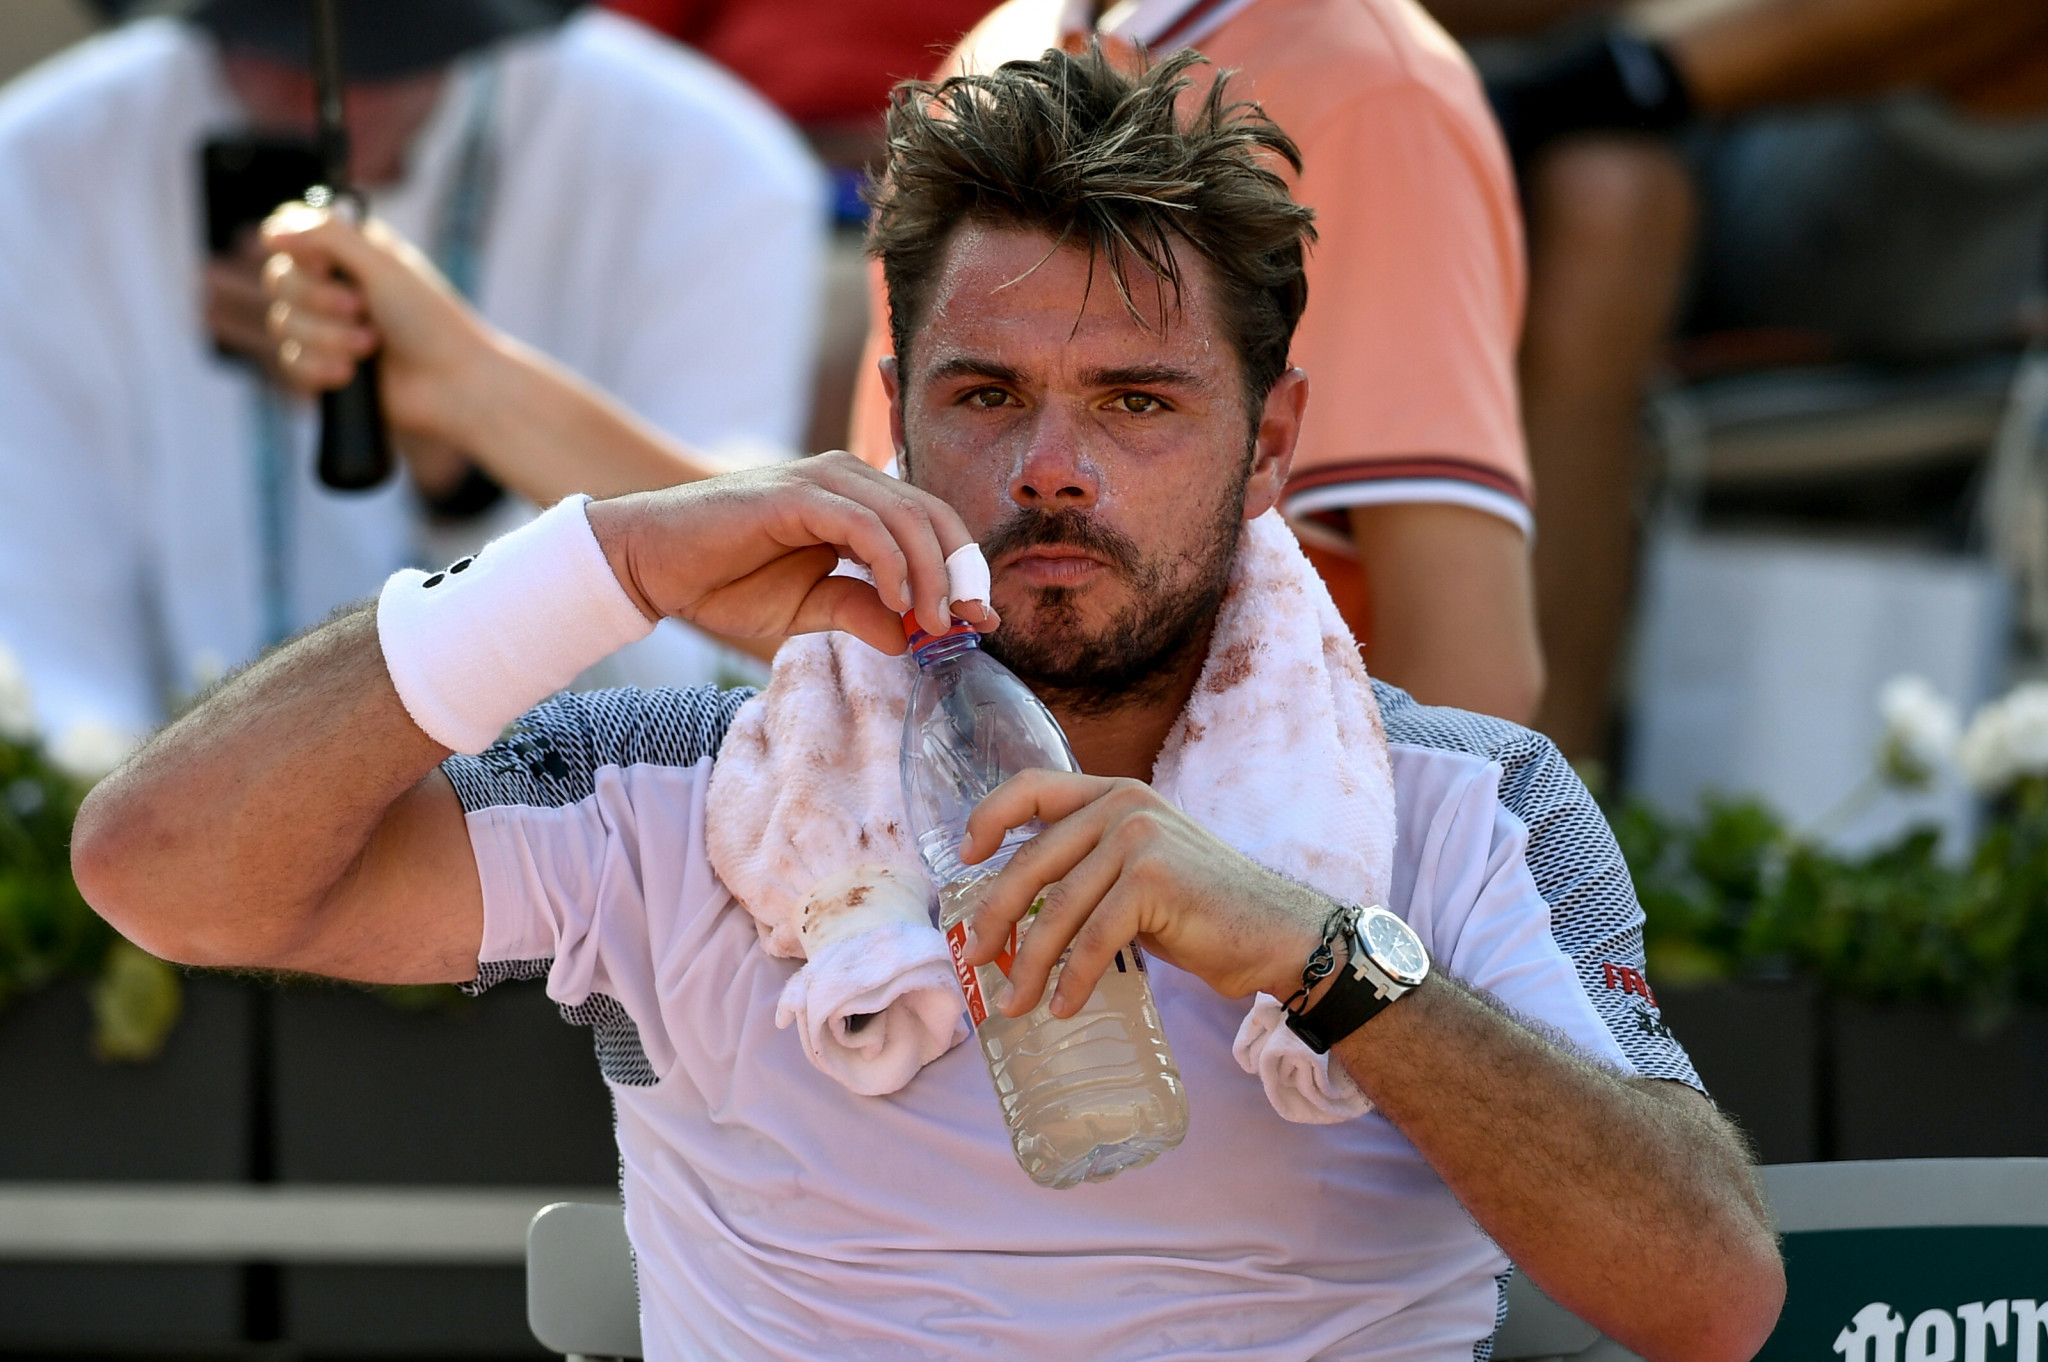 An exhausted Wawrinka takes a drink during his five-hour marathon match with Tsitsipas ©Getty Images